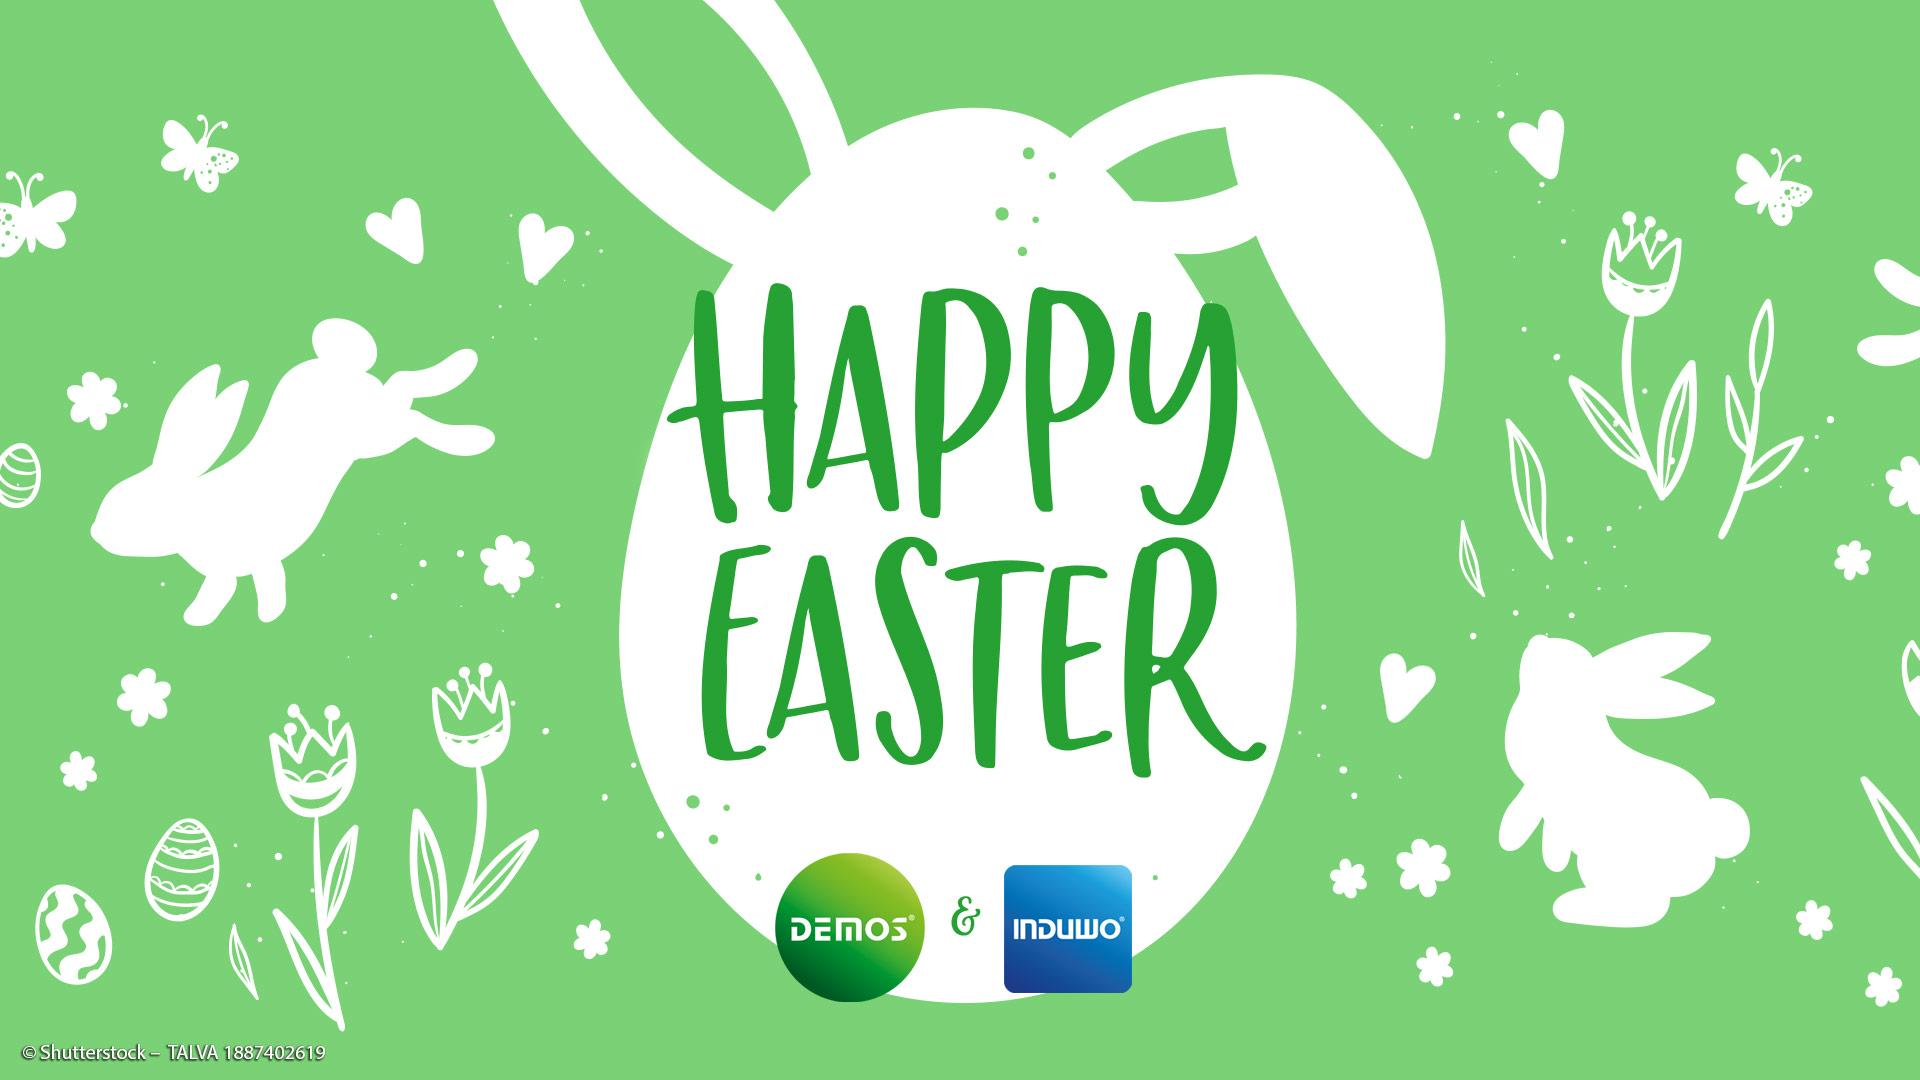 We wish you a happy Easter 